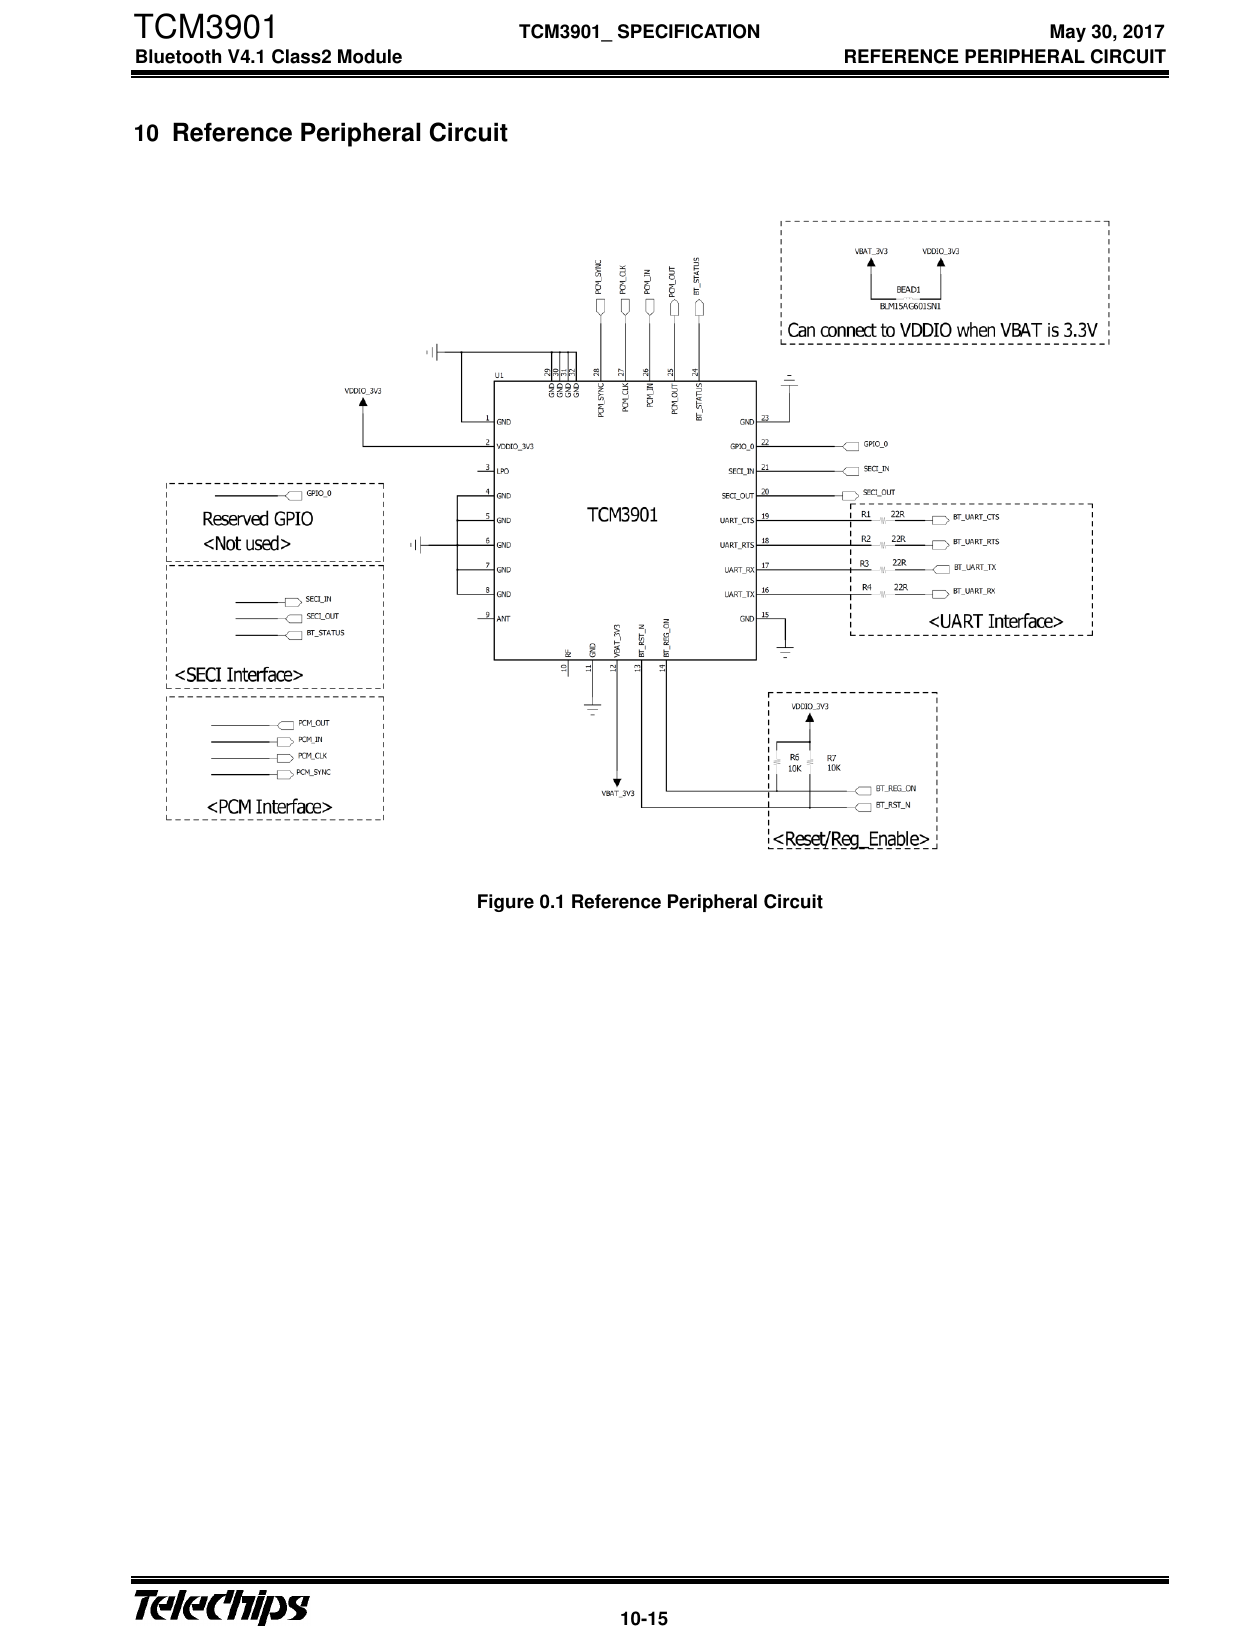 TCM3901  TCM3901_ SPECIFICATION  May 30, 2017 Bluetooth V4.1 Class2 Module    REFERENCE PERIPHERAL CIRCUIT     10-15  10  Reference Peripheral Circuit    Figure 0.1 Reference Peripheral Circuit   